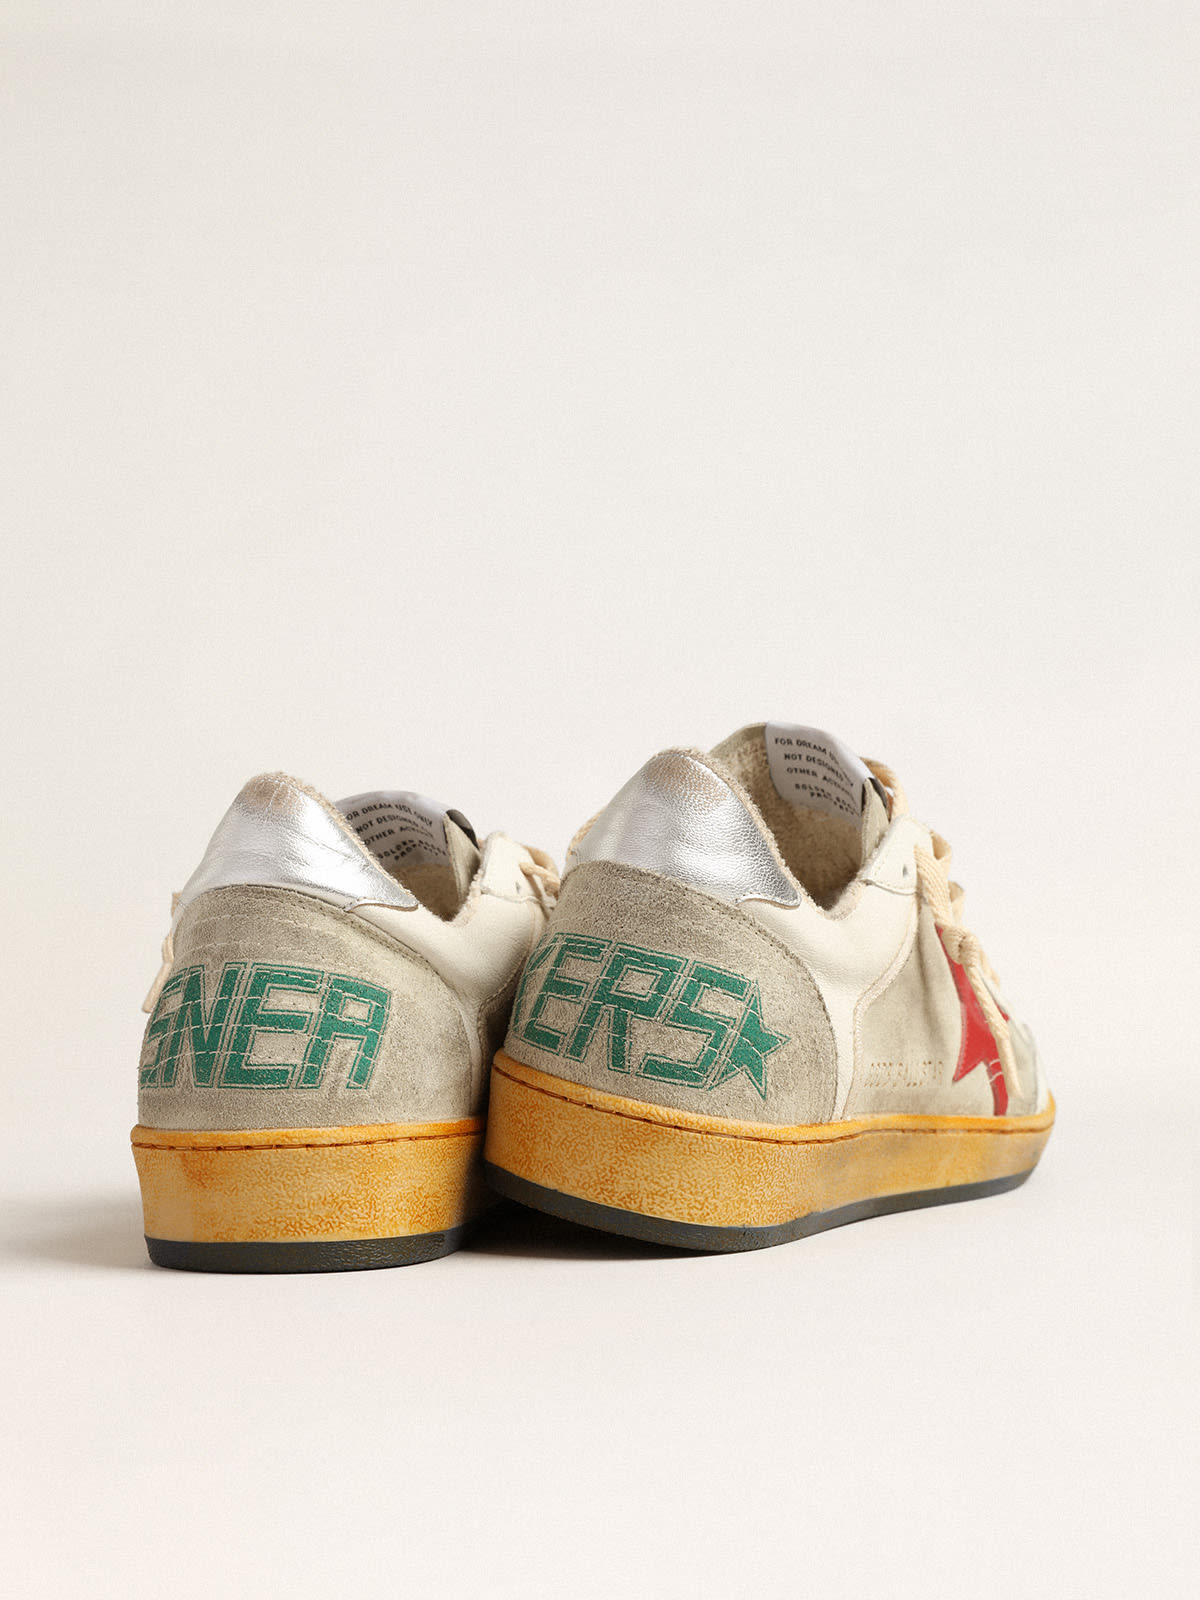 Golden Goose - Ball Star in gray suede with red star and silver heel tab in 